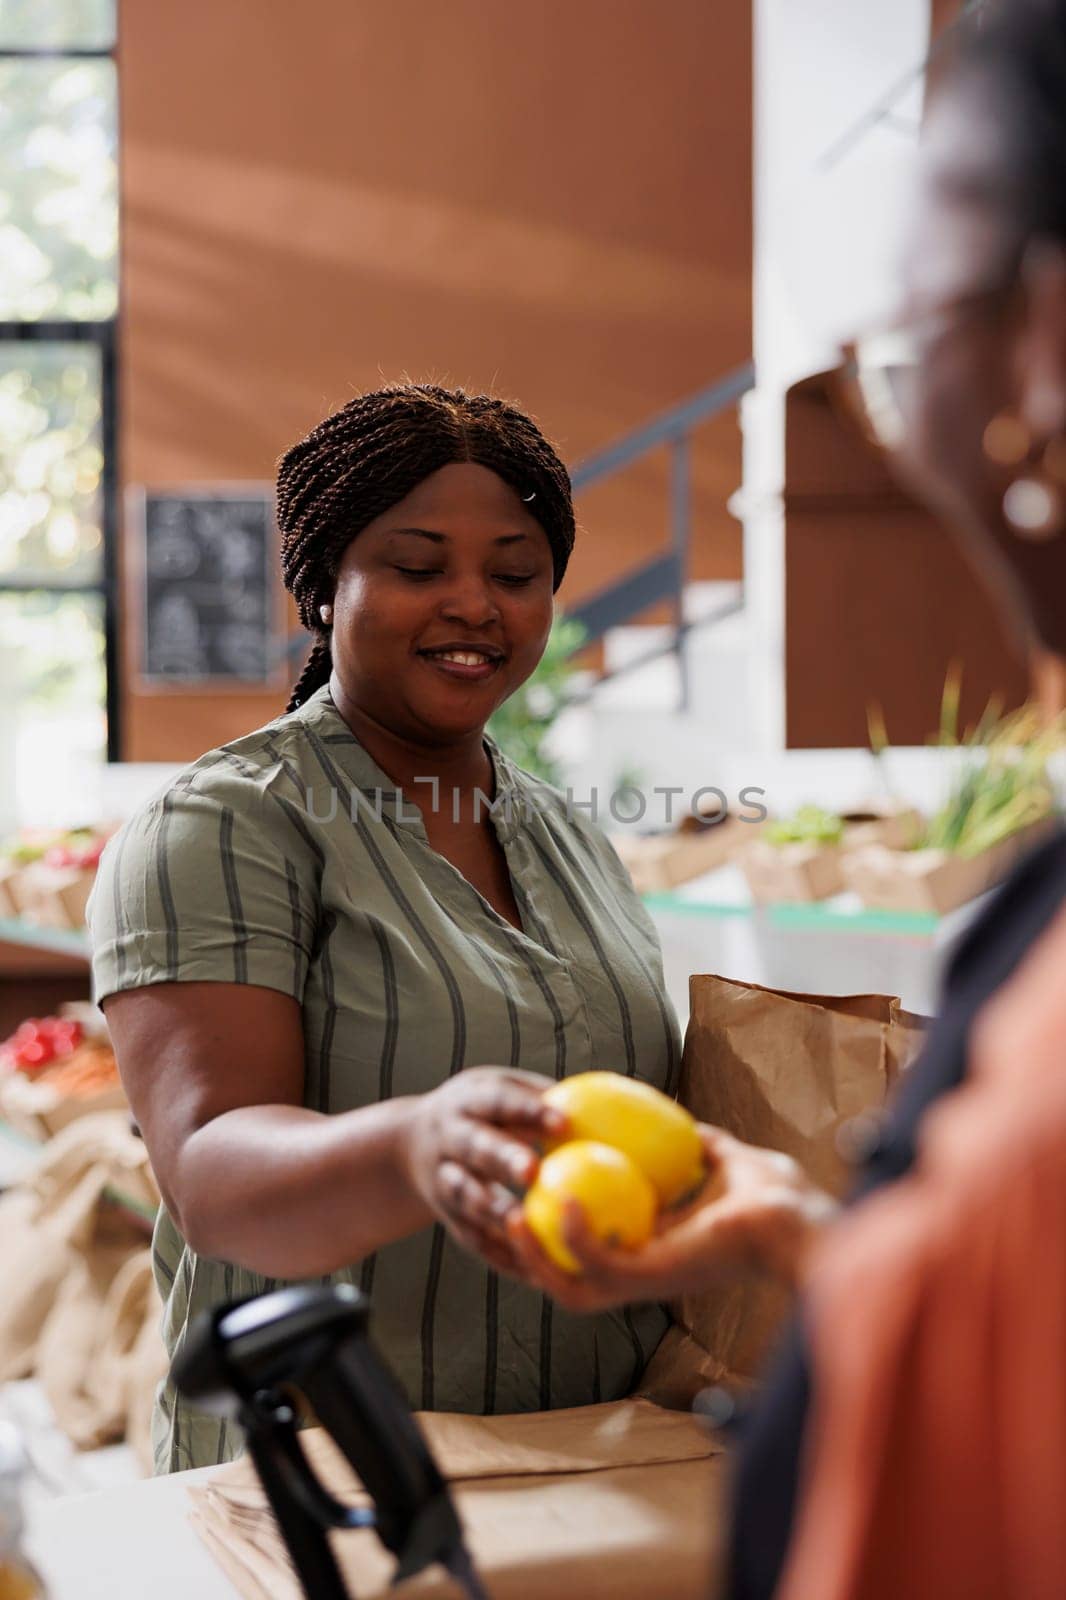 Smiling black woman handing over freshly harvested lemons to vendor for weighing at checkout counter. Portrait of african american consumer with paper bag giving locally grown fresh produce to cashier